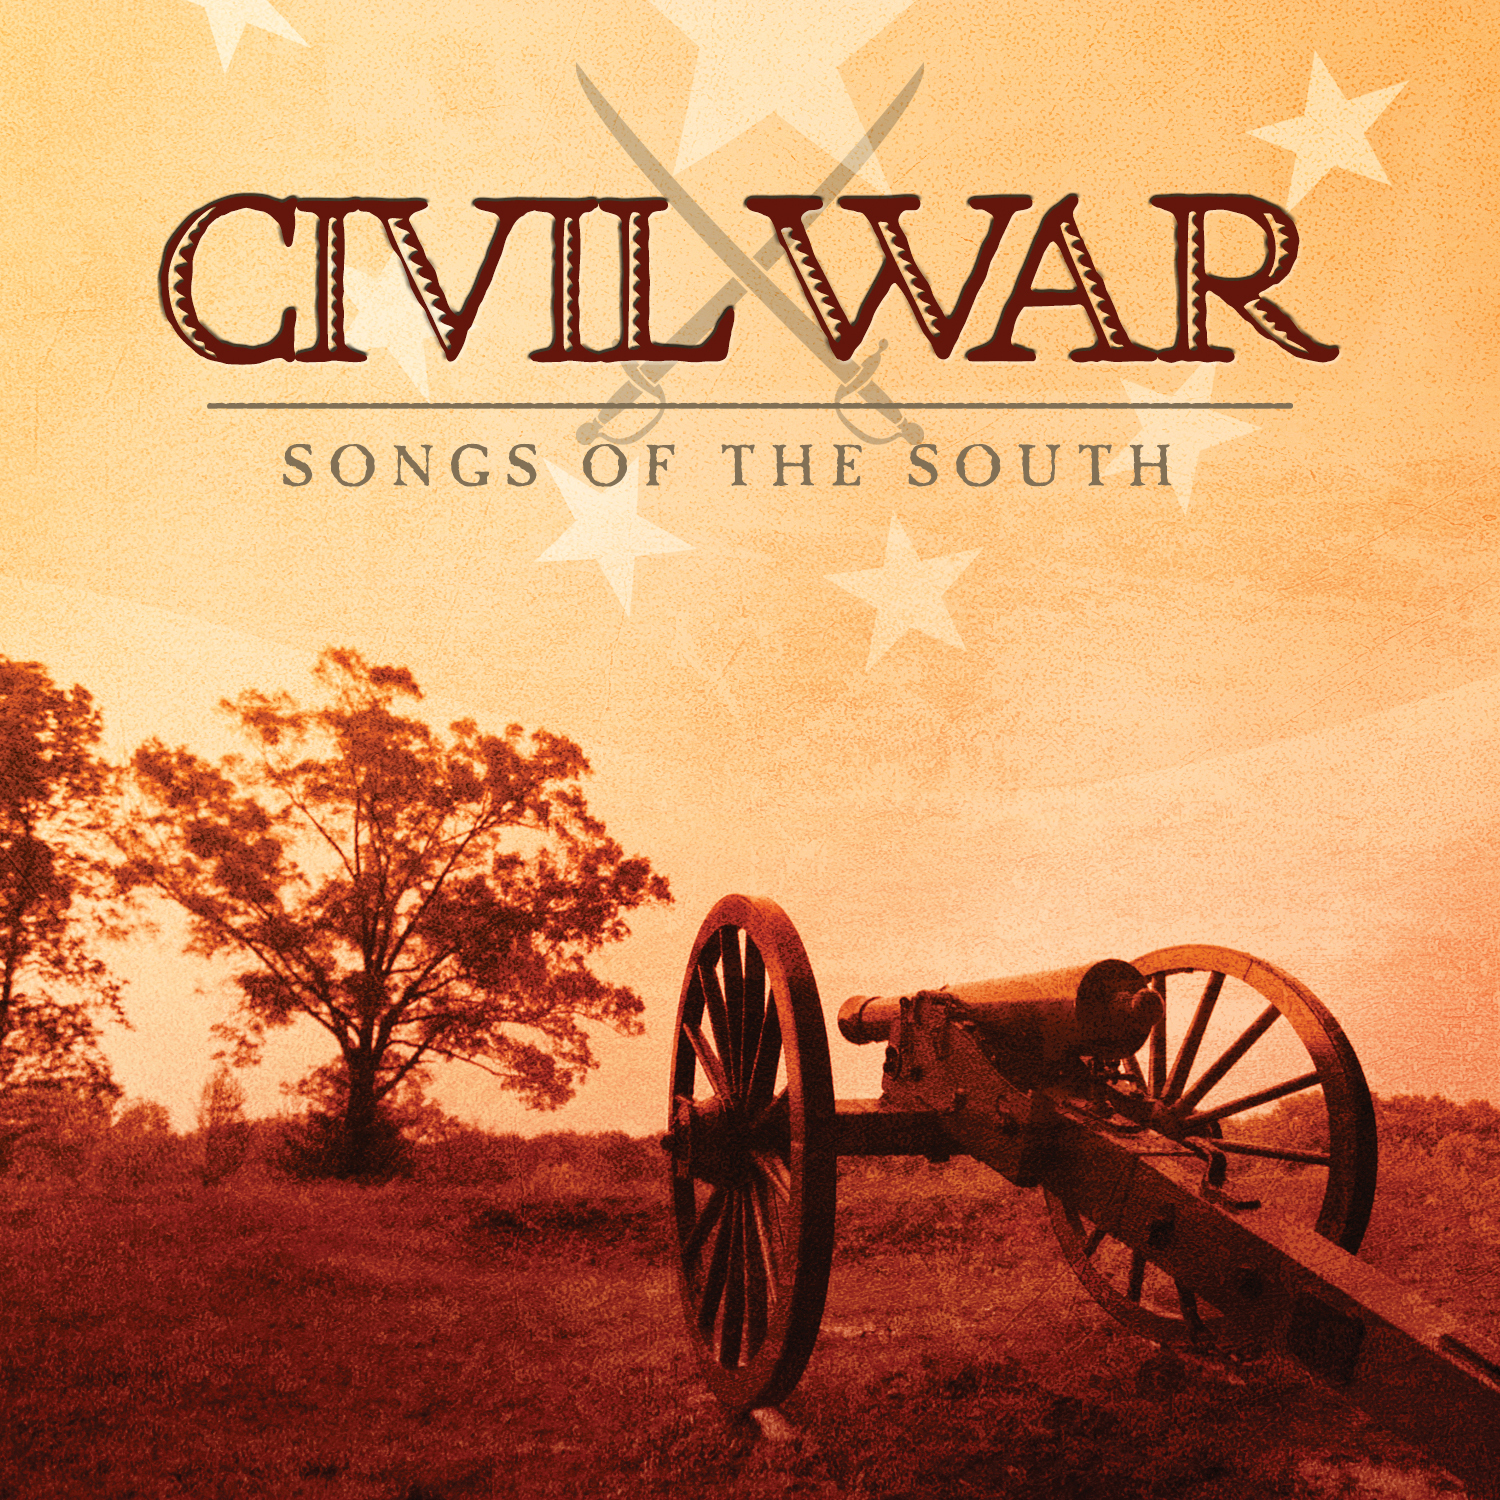 in the civil war what was the south called when they splitted with uS